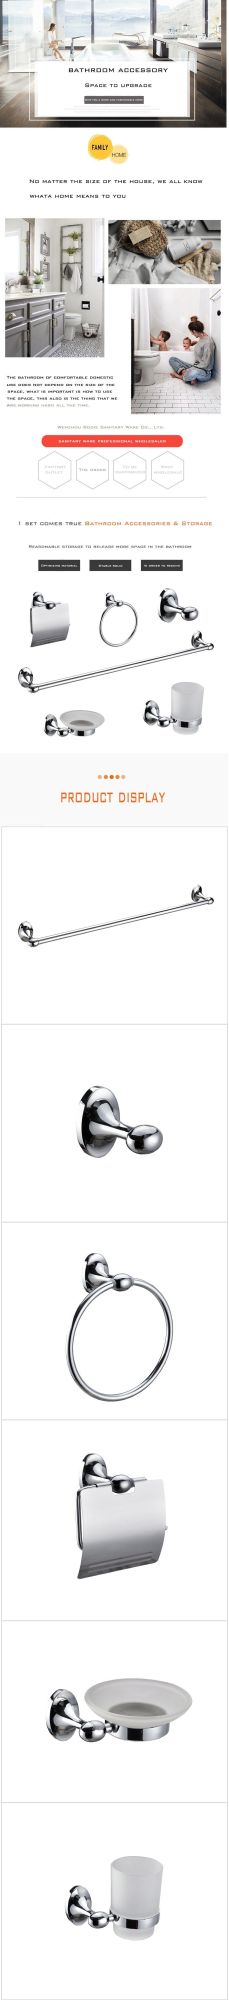 Wenzhou Sanitary Fittings and Bathroom Accessories Gujranwala